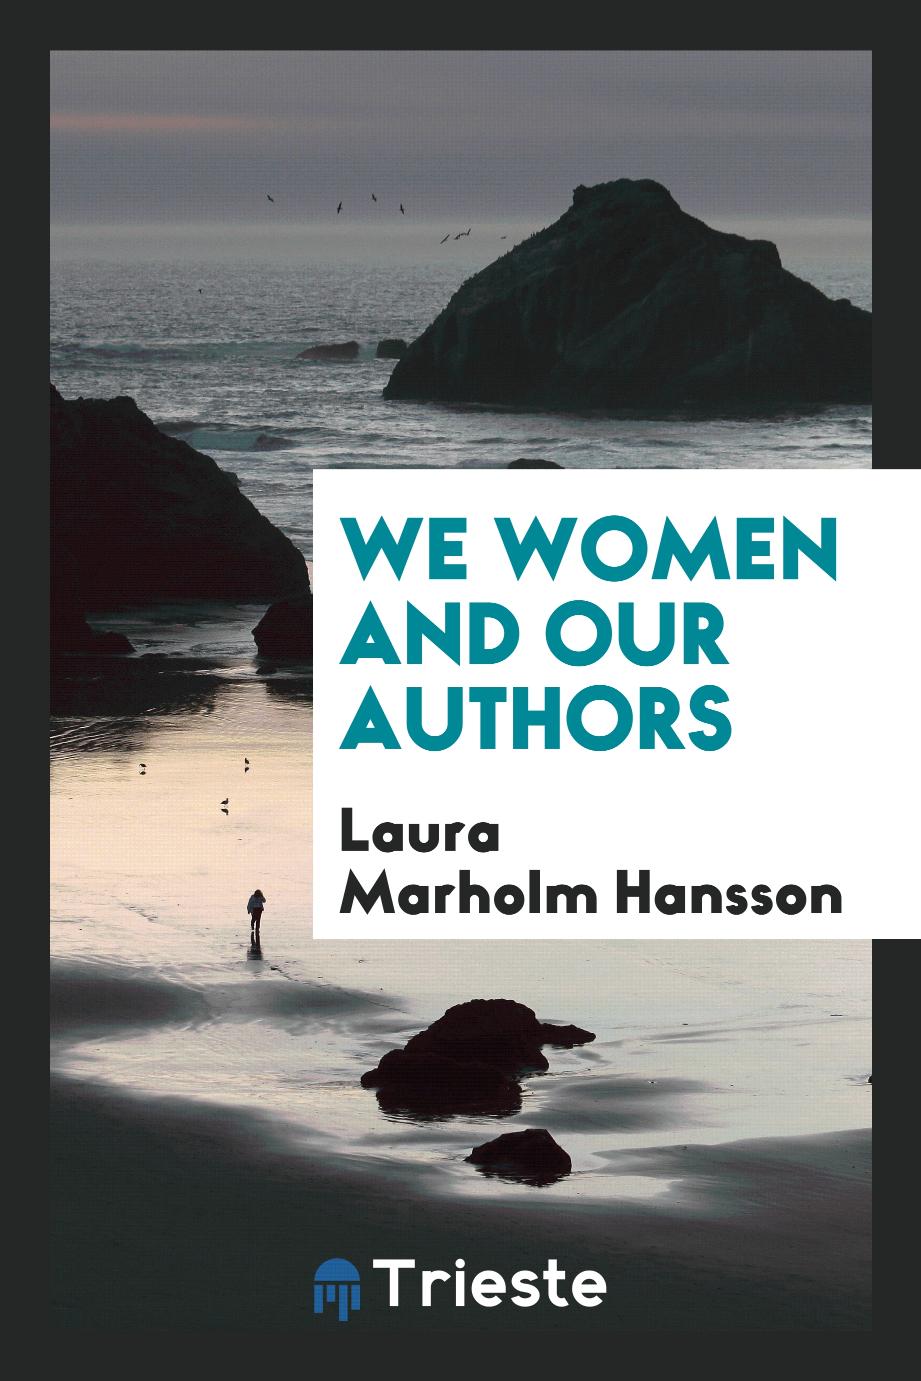 We women and our authors